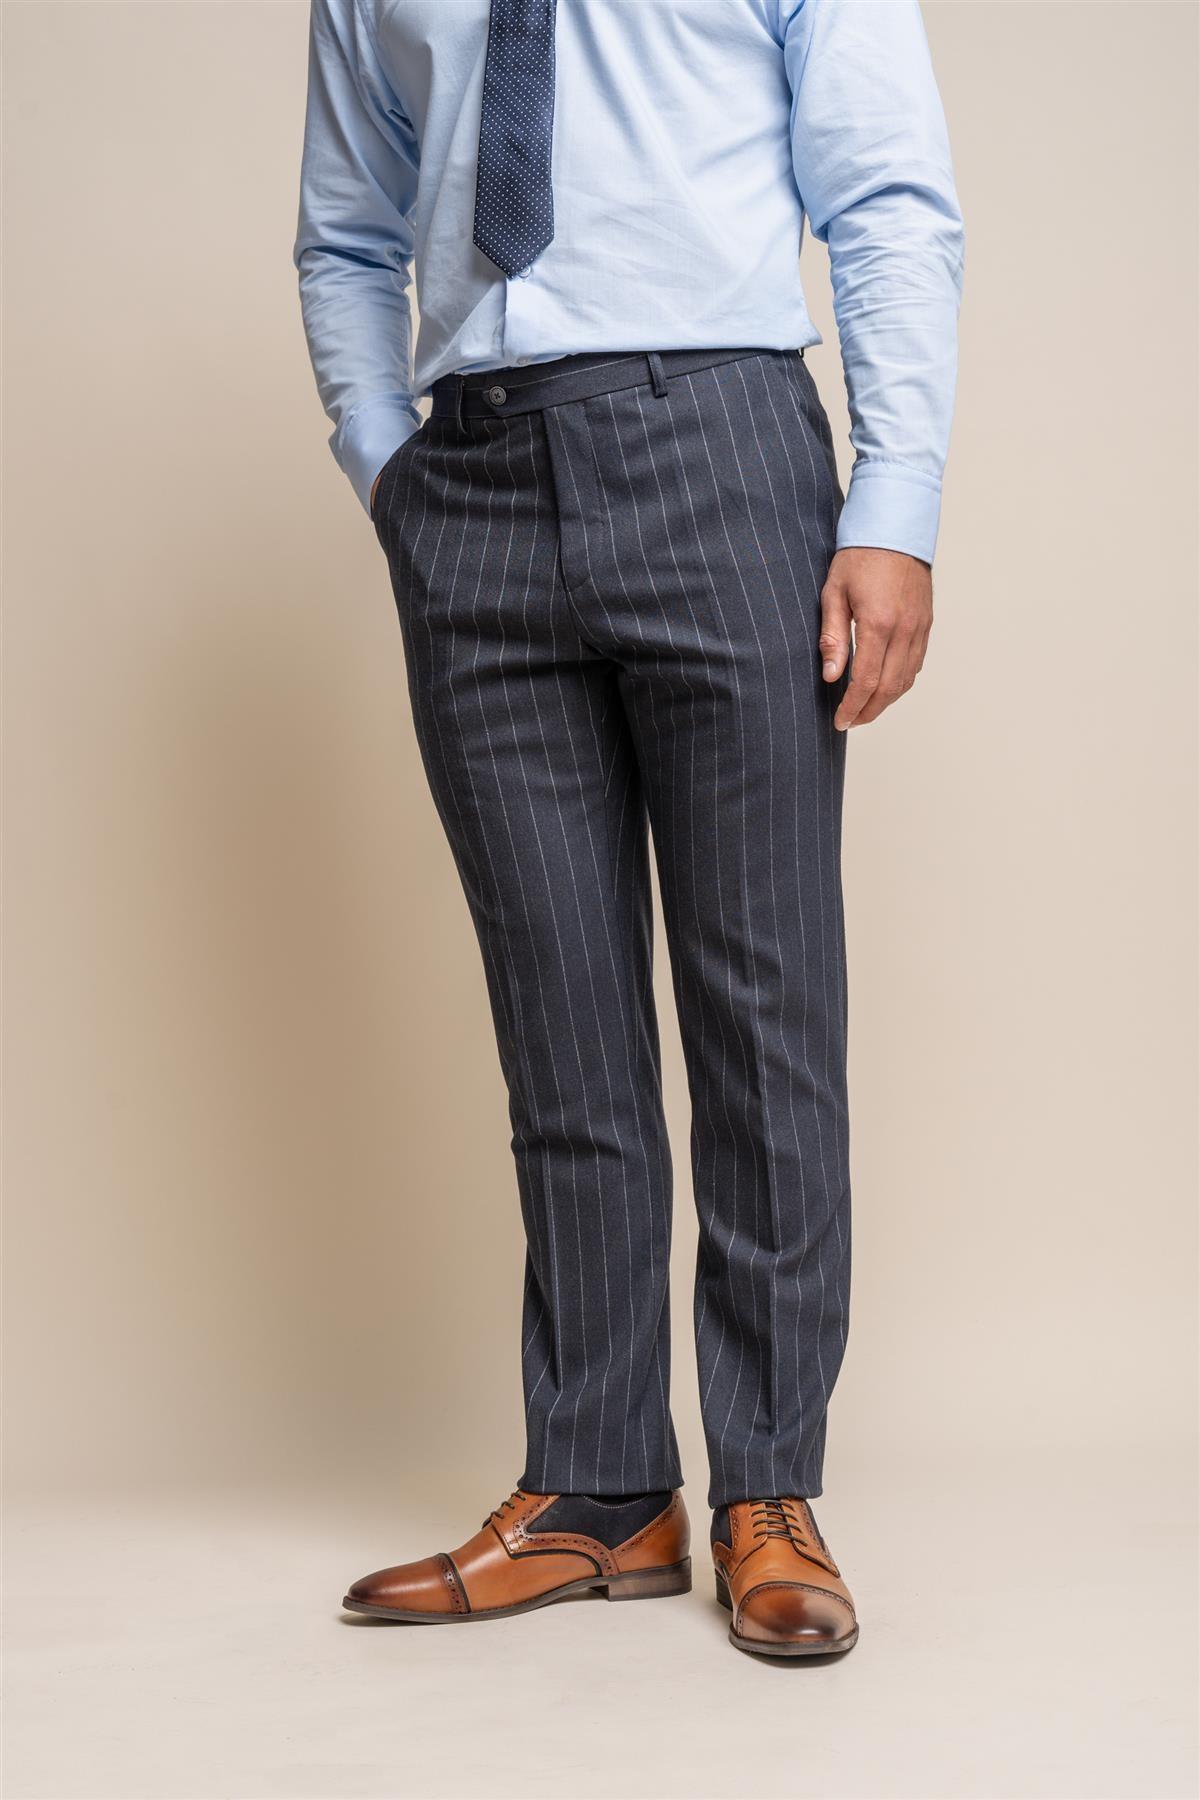 Invincible striped trouser front